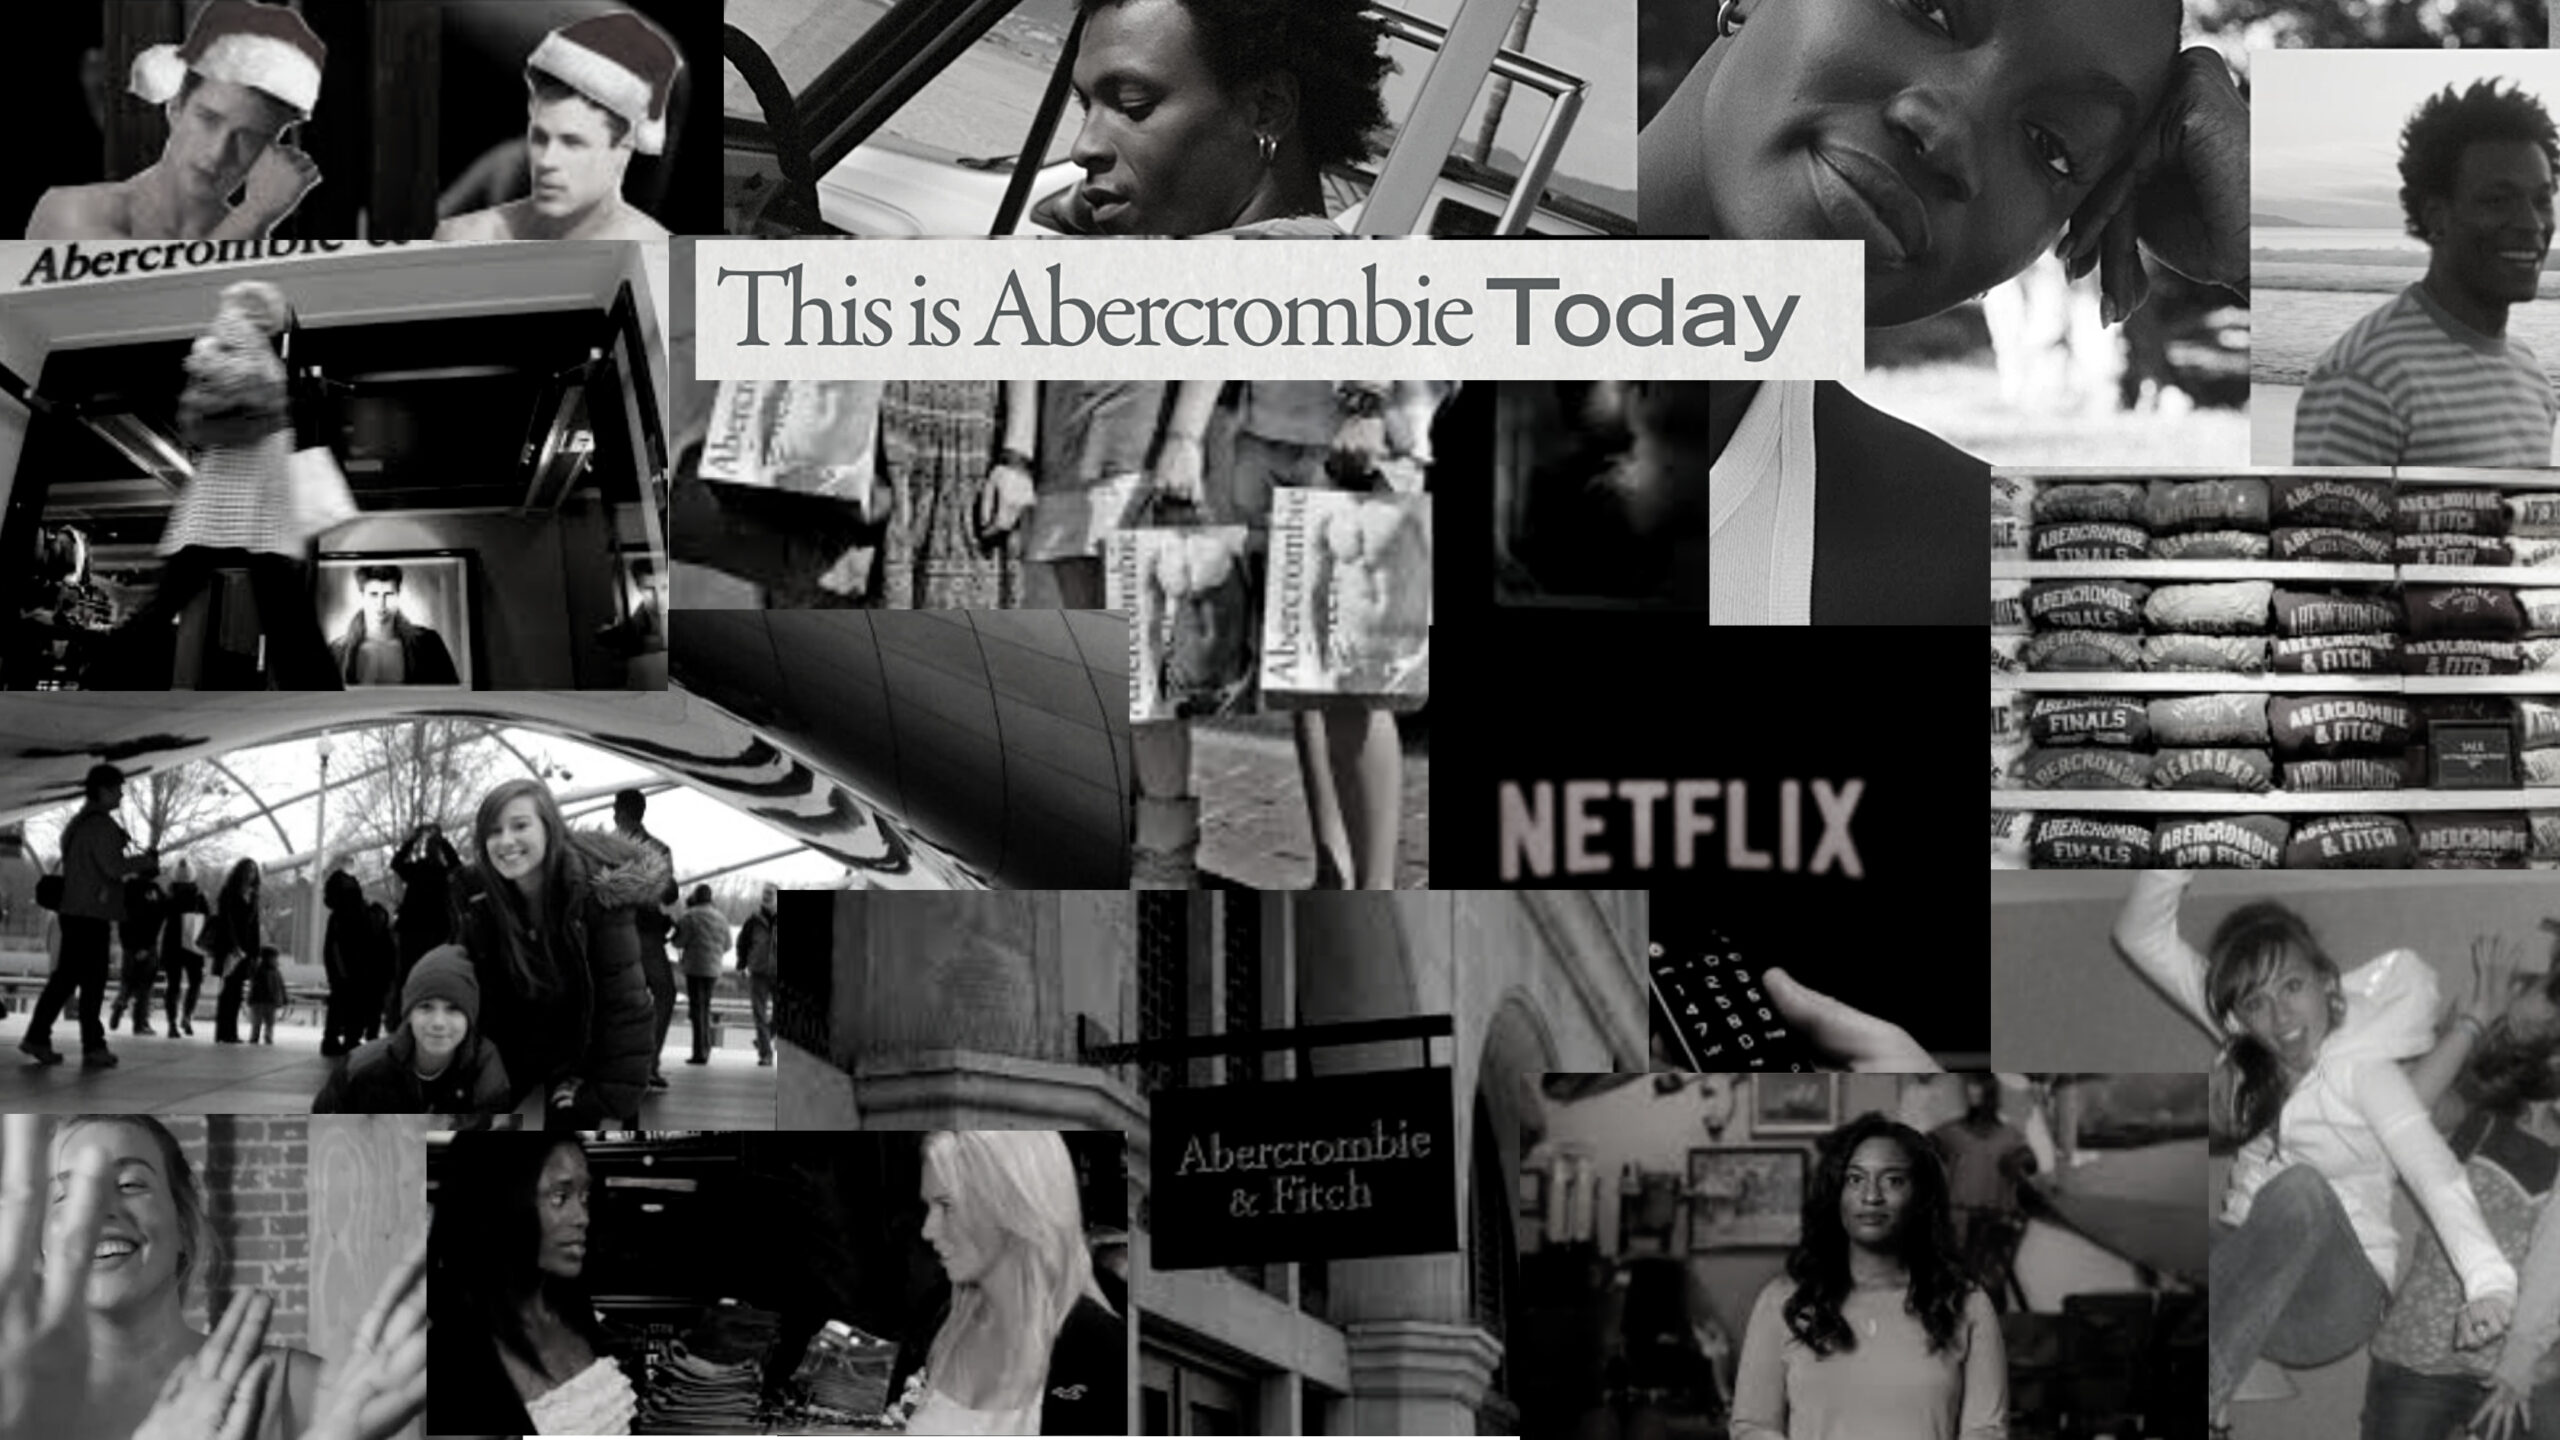 5 Thoughts About The Abercrombie & Fitch Documentary on Netflix